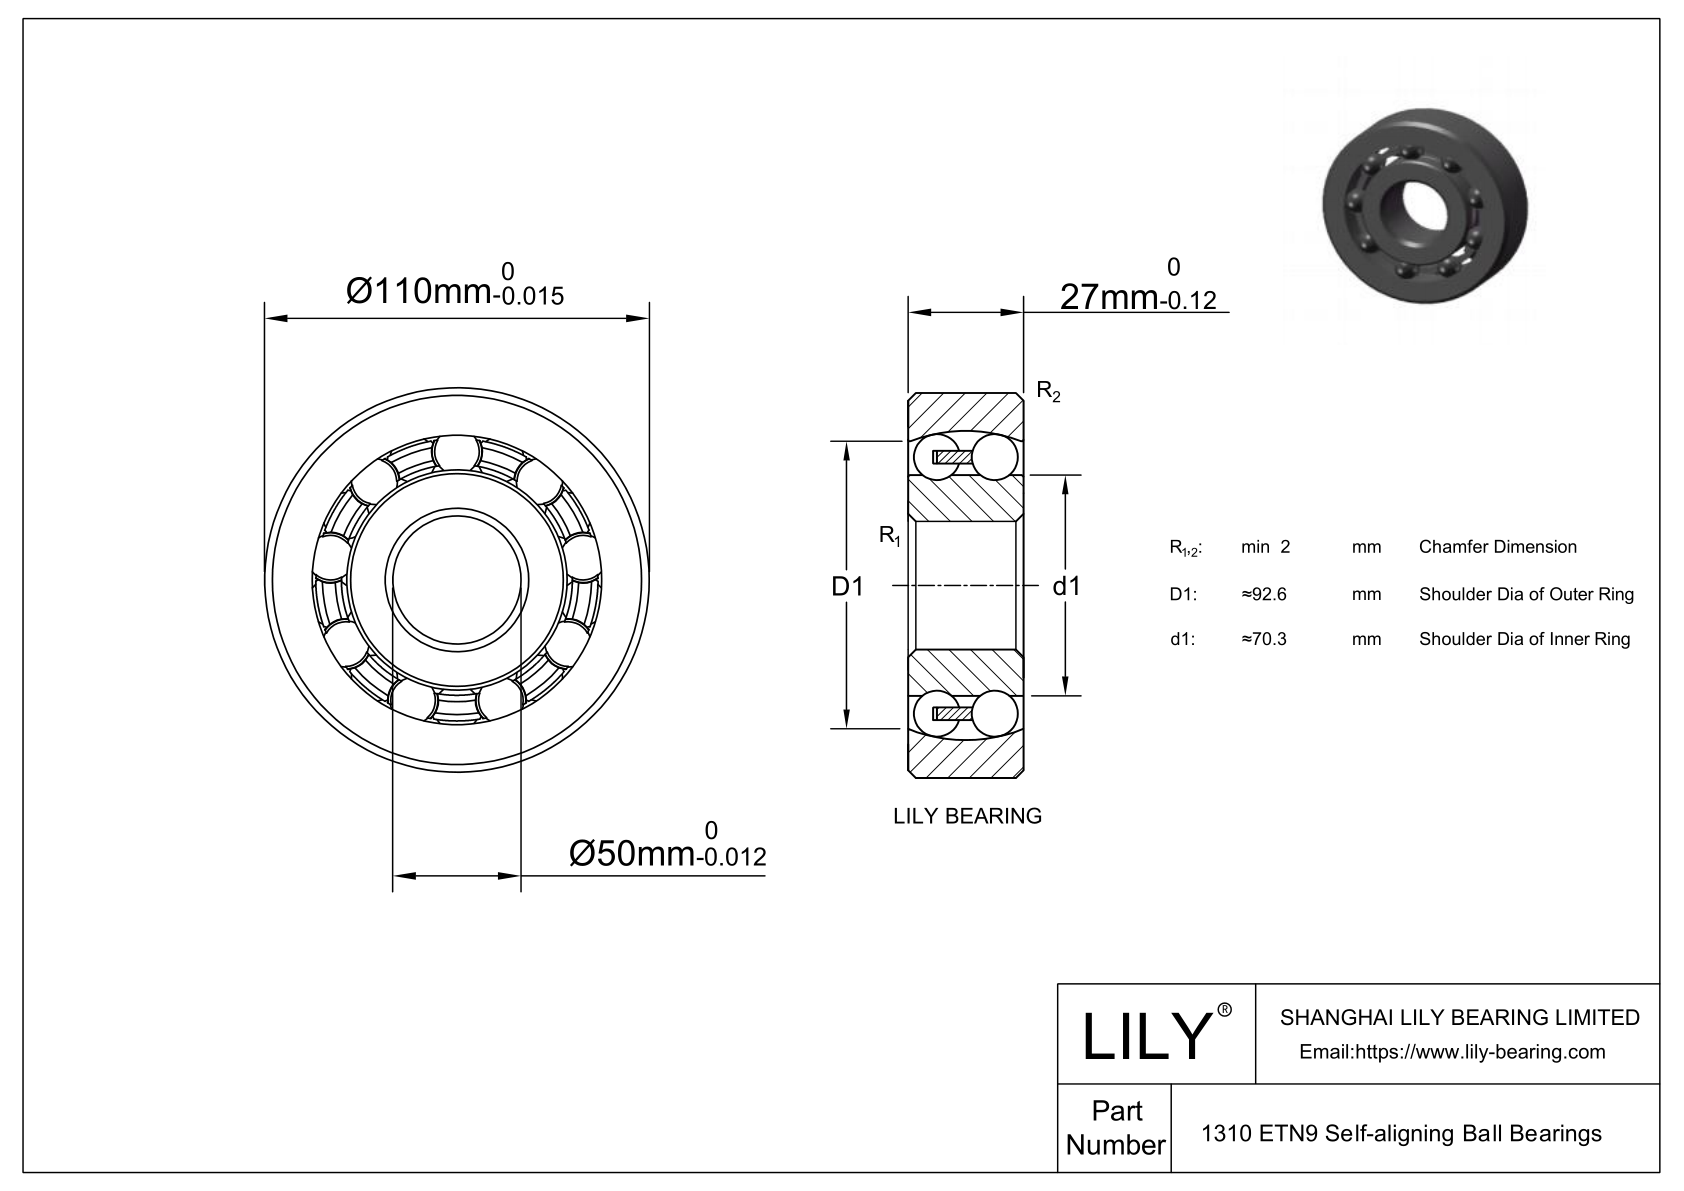 S1310 ETN9 Stainless Steel Self Aligning Ball Bearings cad drawing